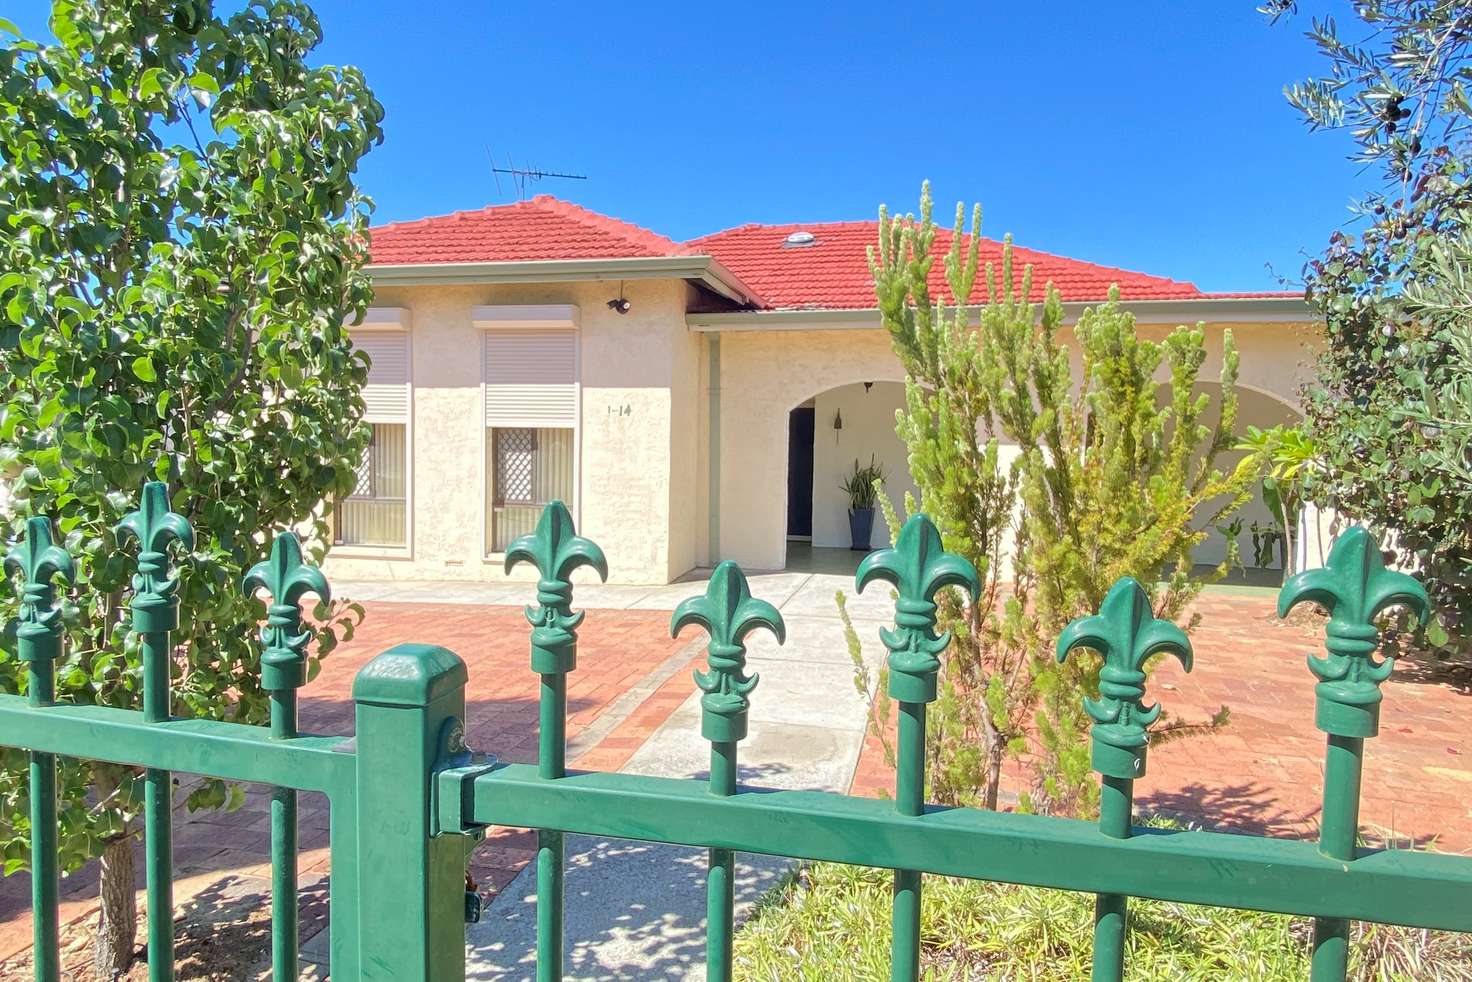 Main view of Homely house listing, 1/14 Cope Street, Midland WA 6056